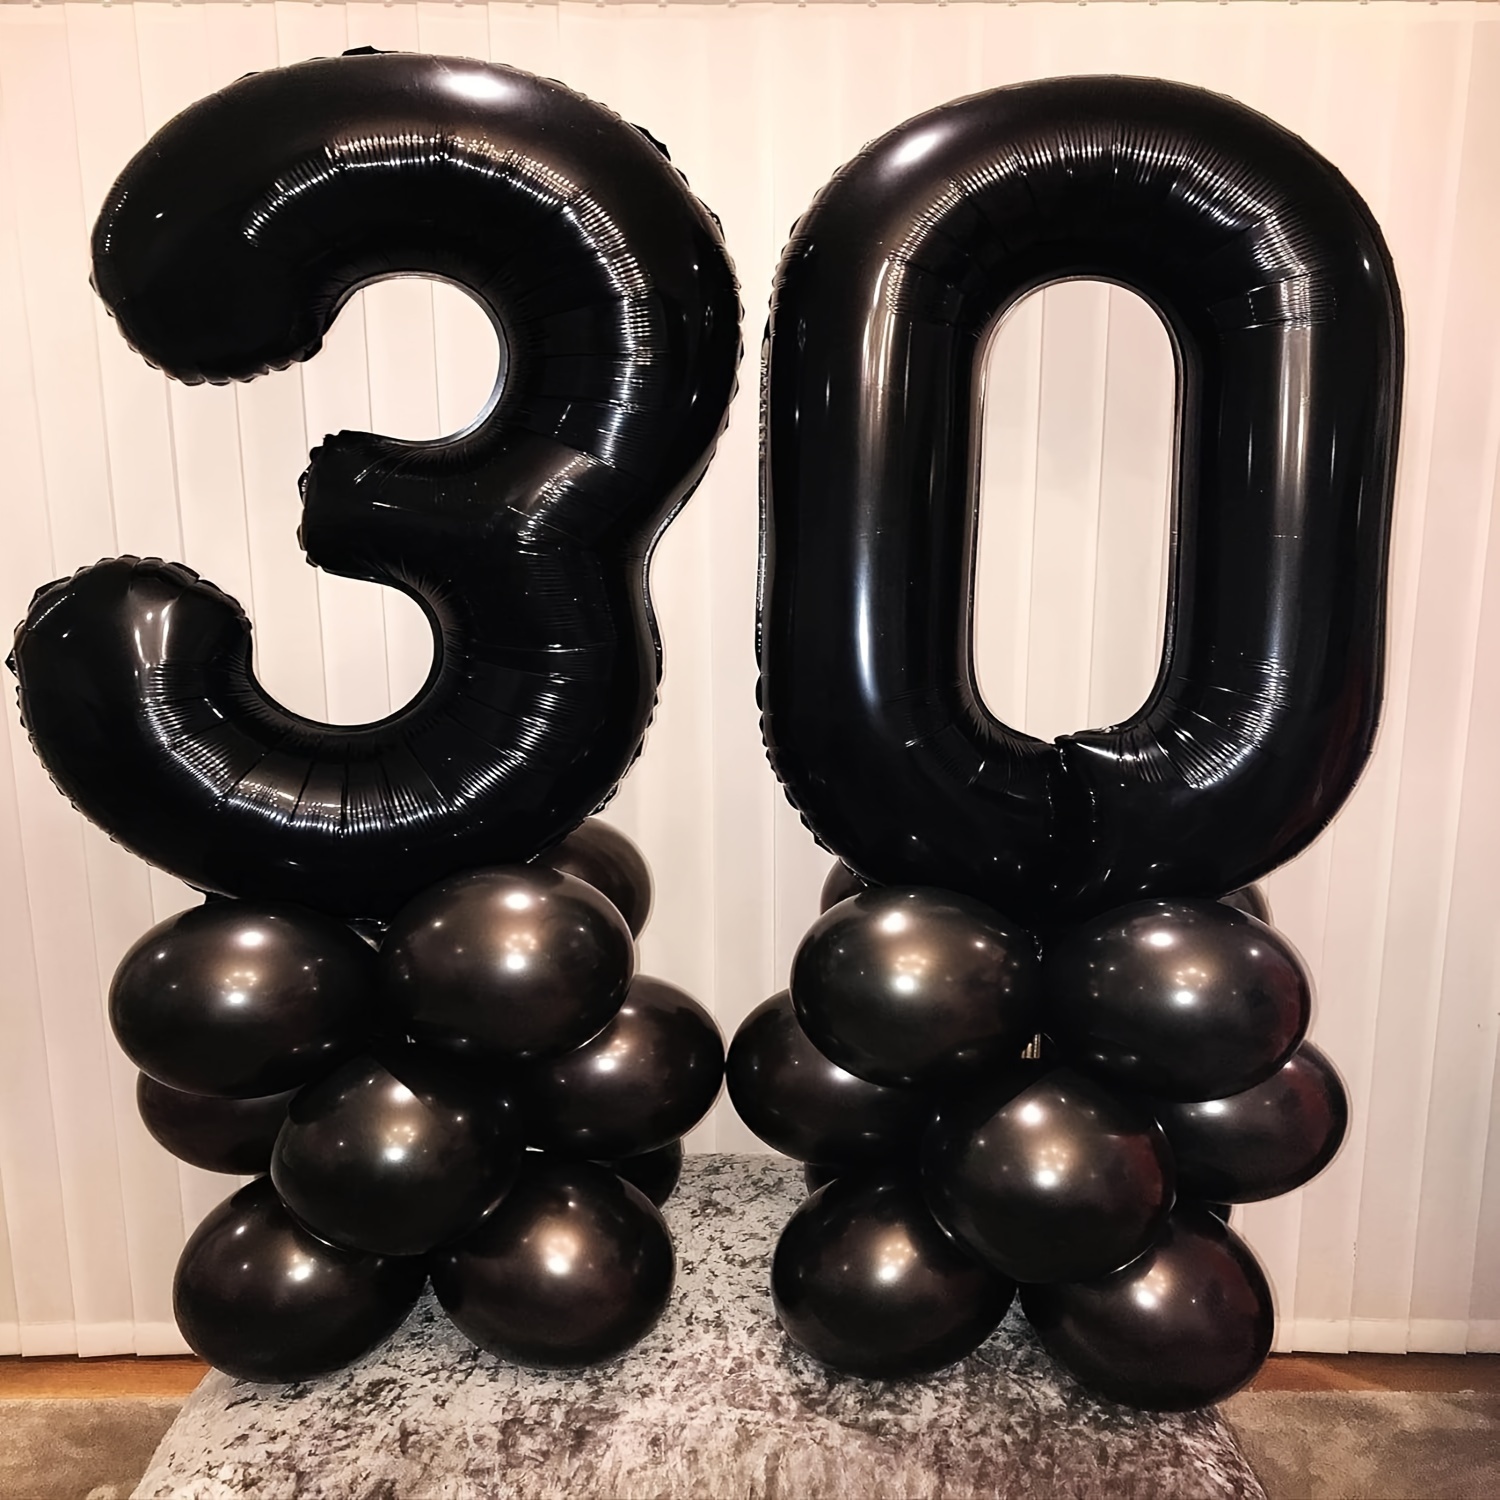 Silver & Black 14th Birthday Decorations - 40 Number Balloons